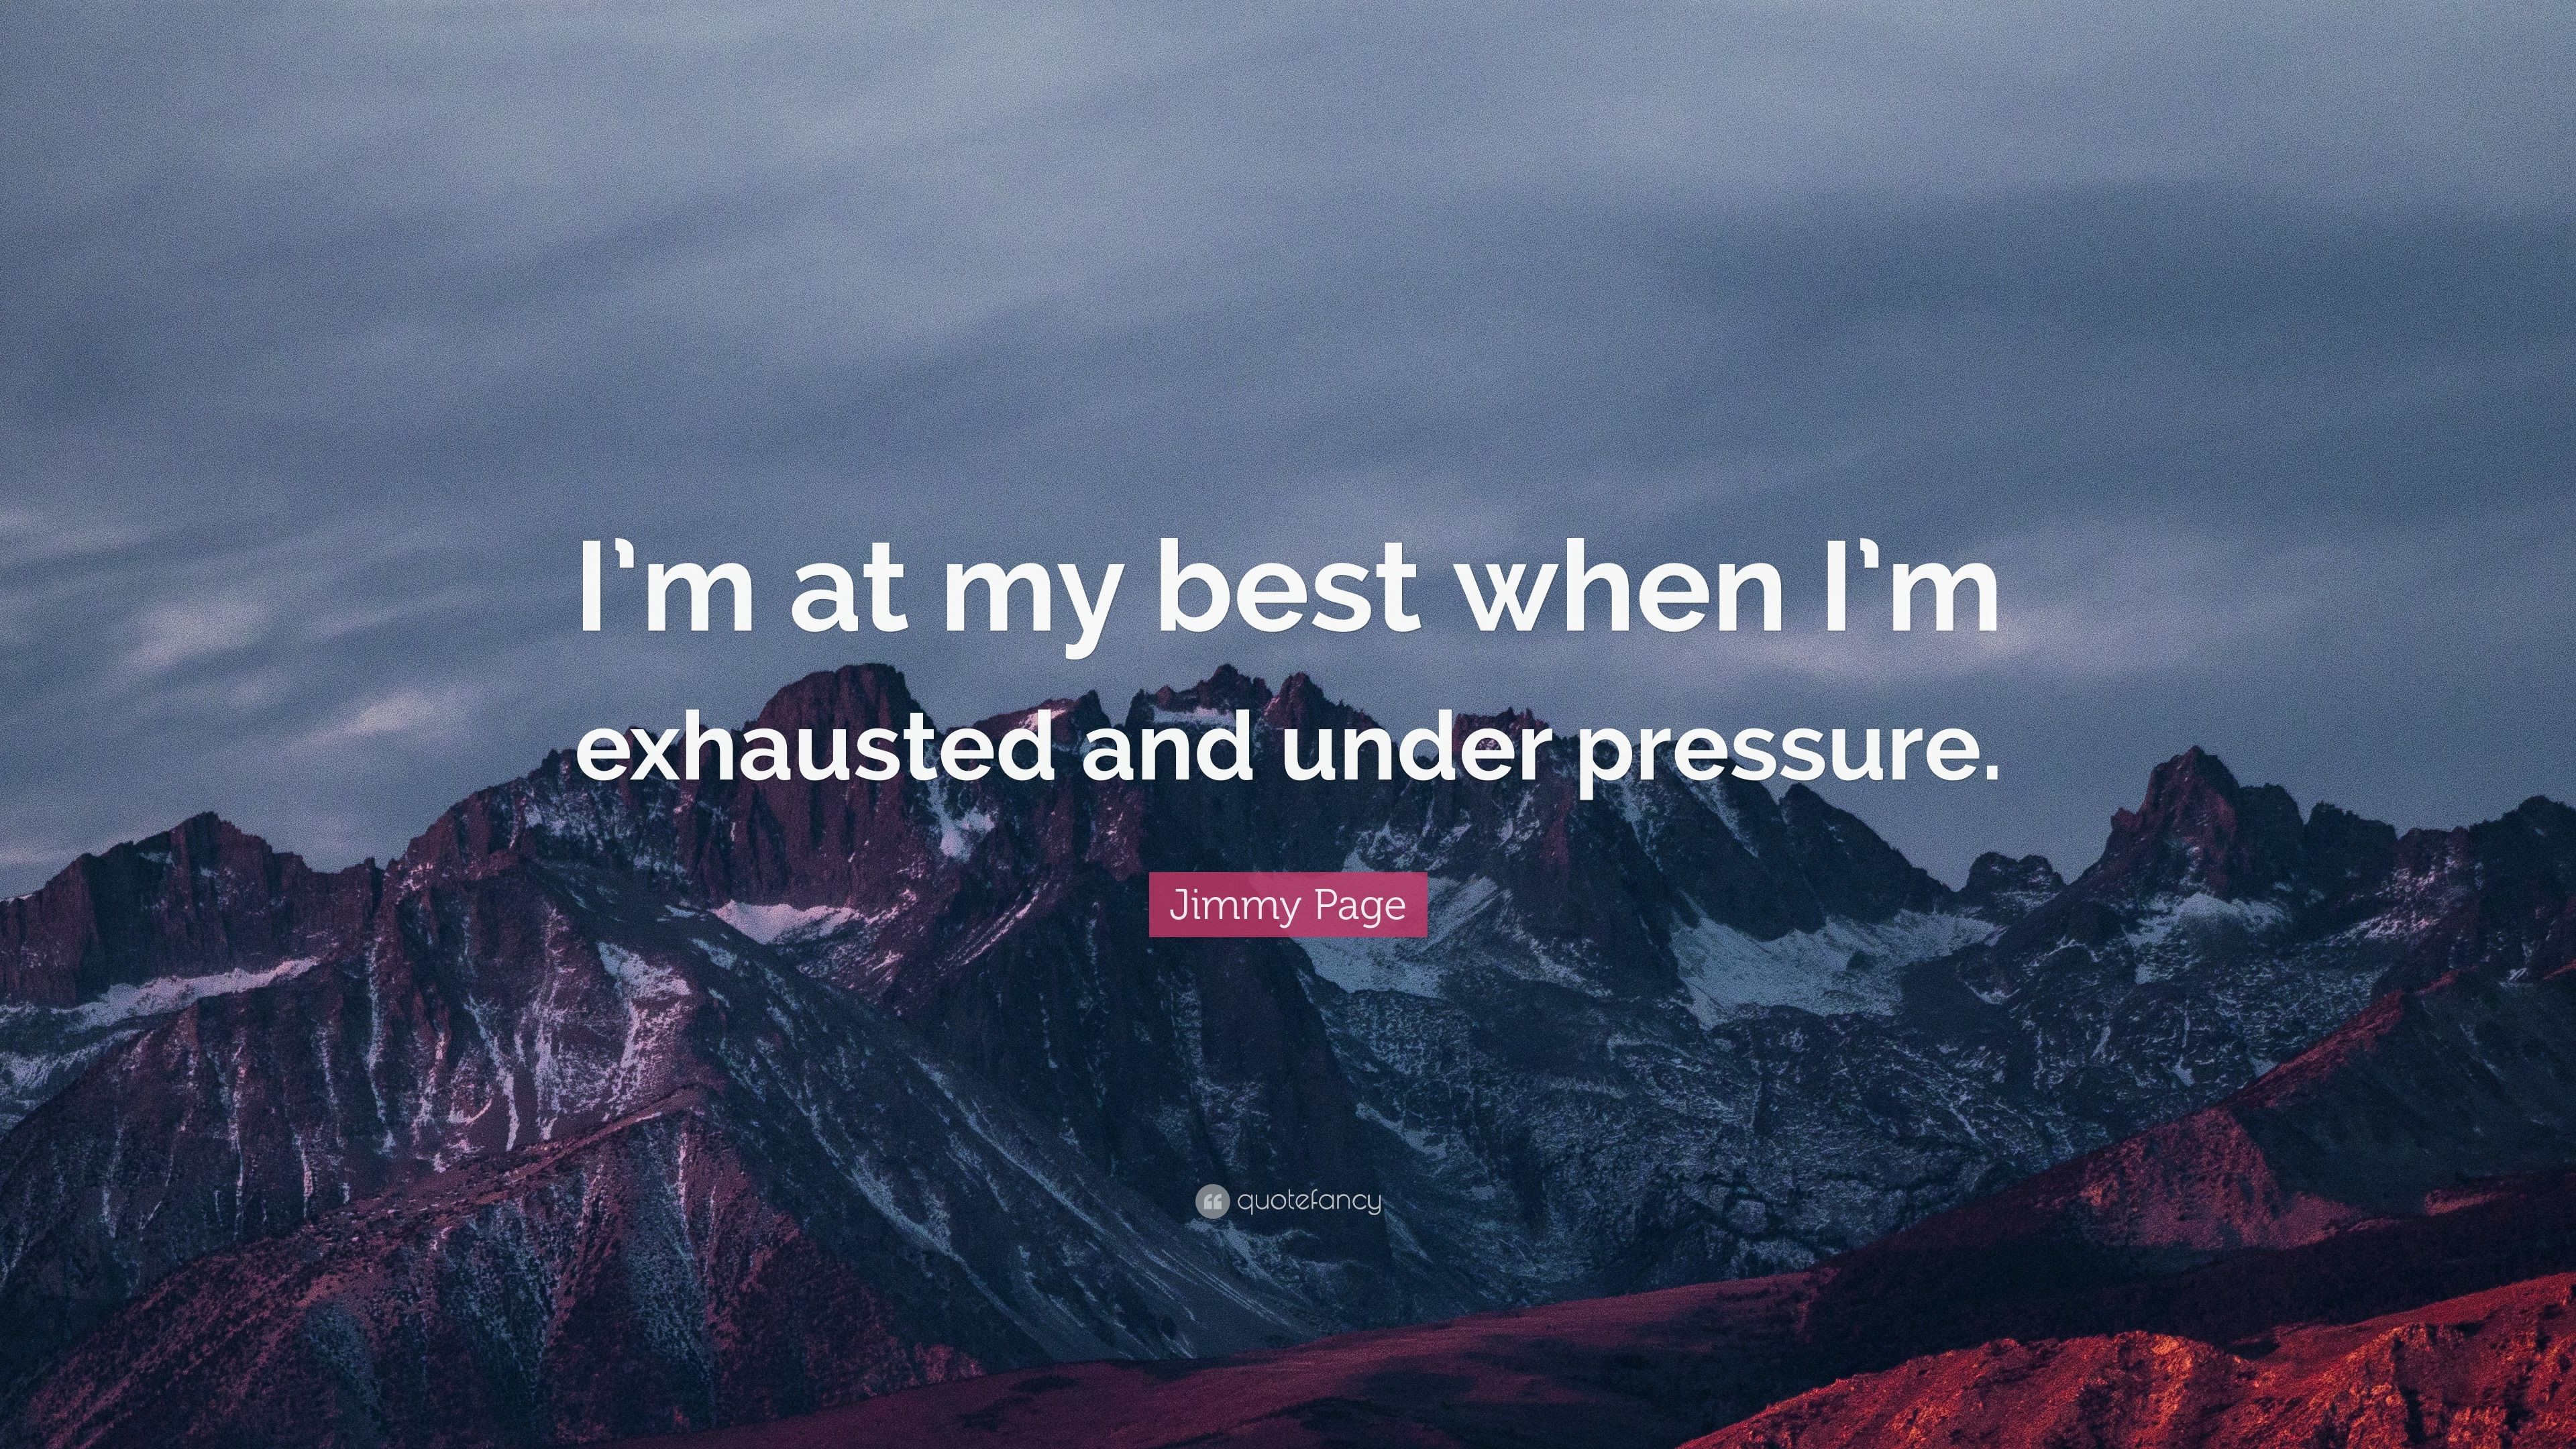 3840x2160 Jimmy Page Quote: “I'm at my best when I'm exhausted